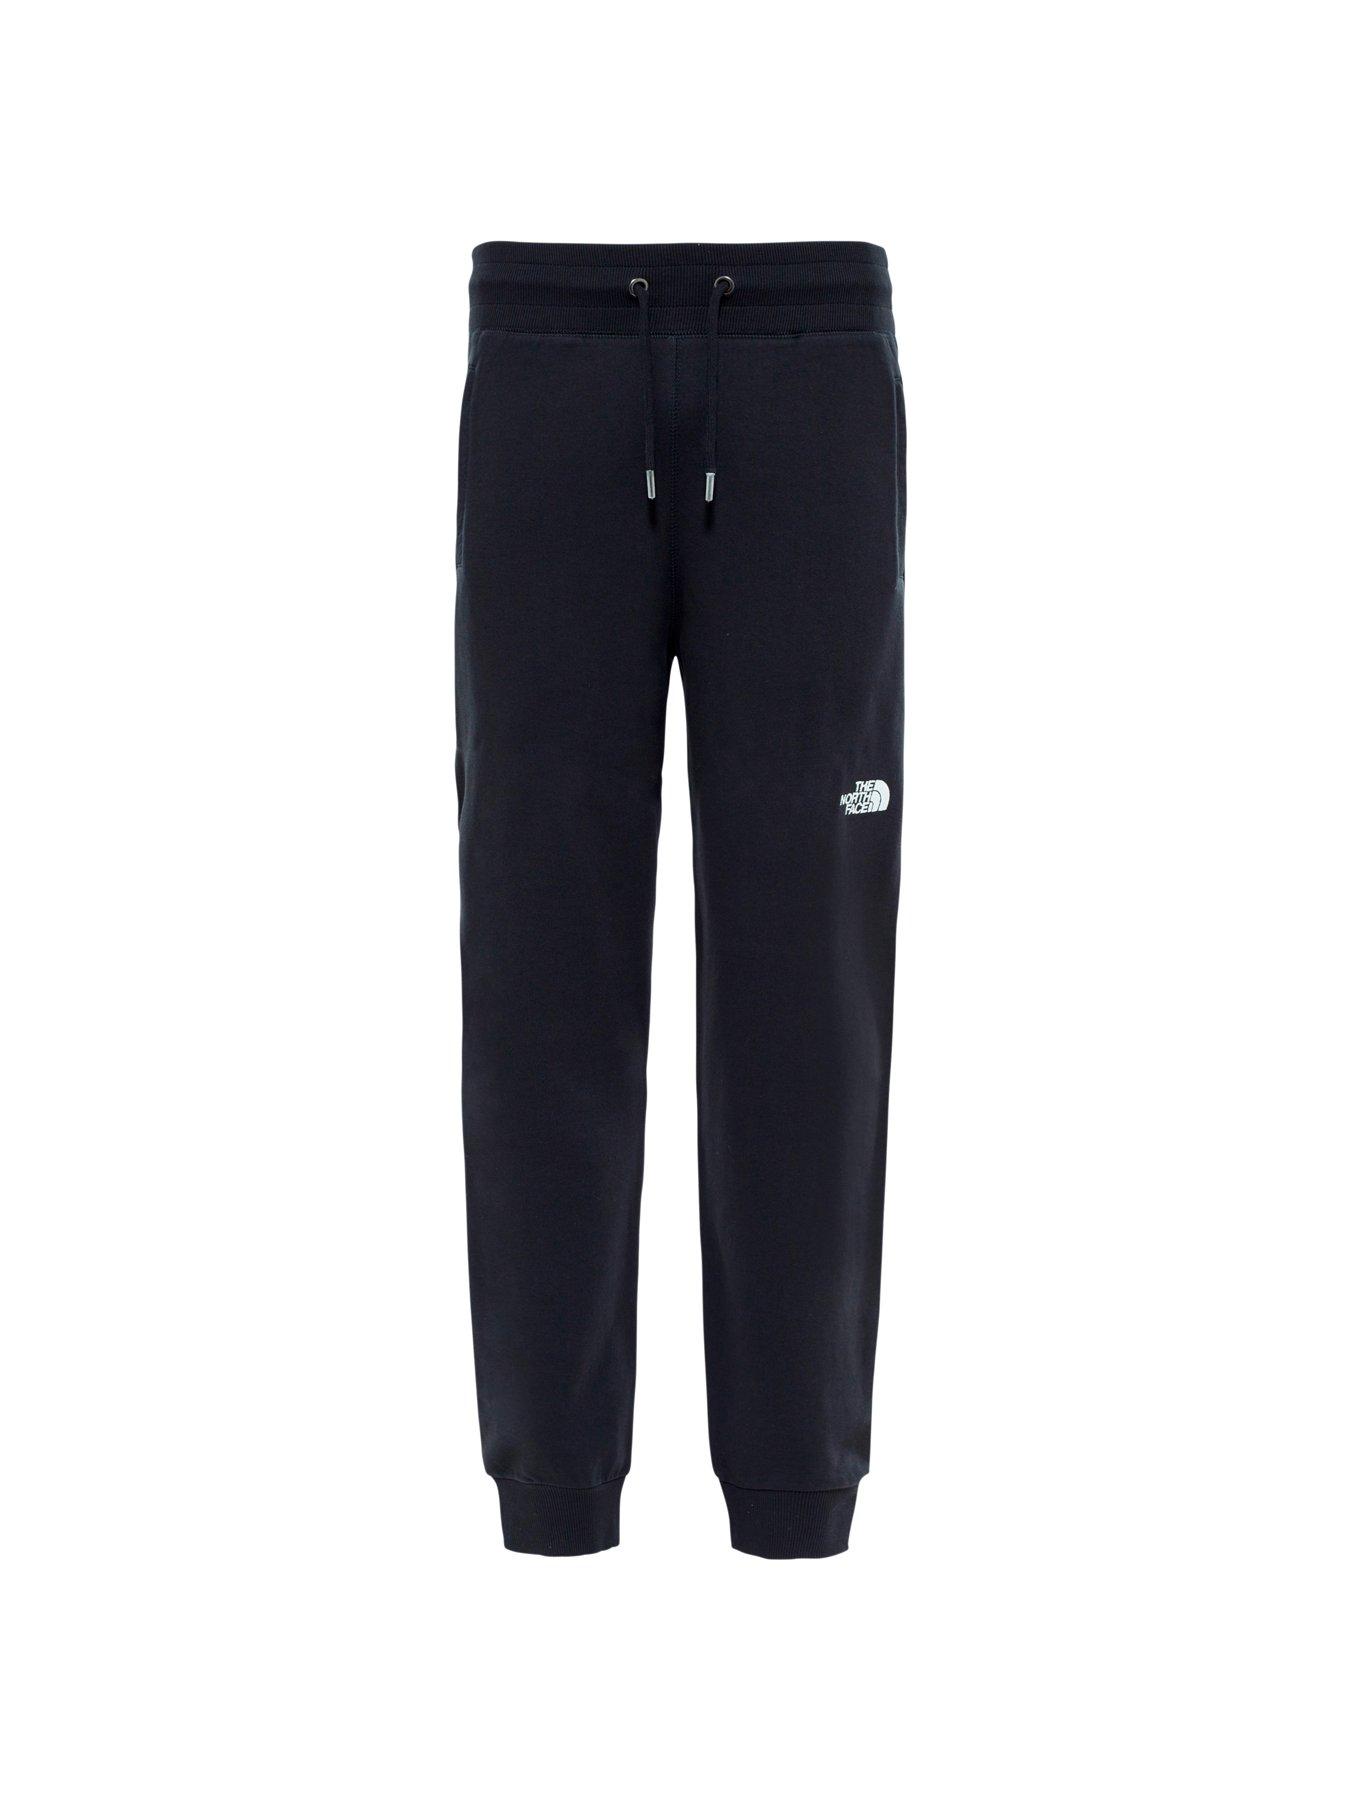 north face mens tracksuit bottoms